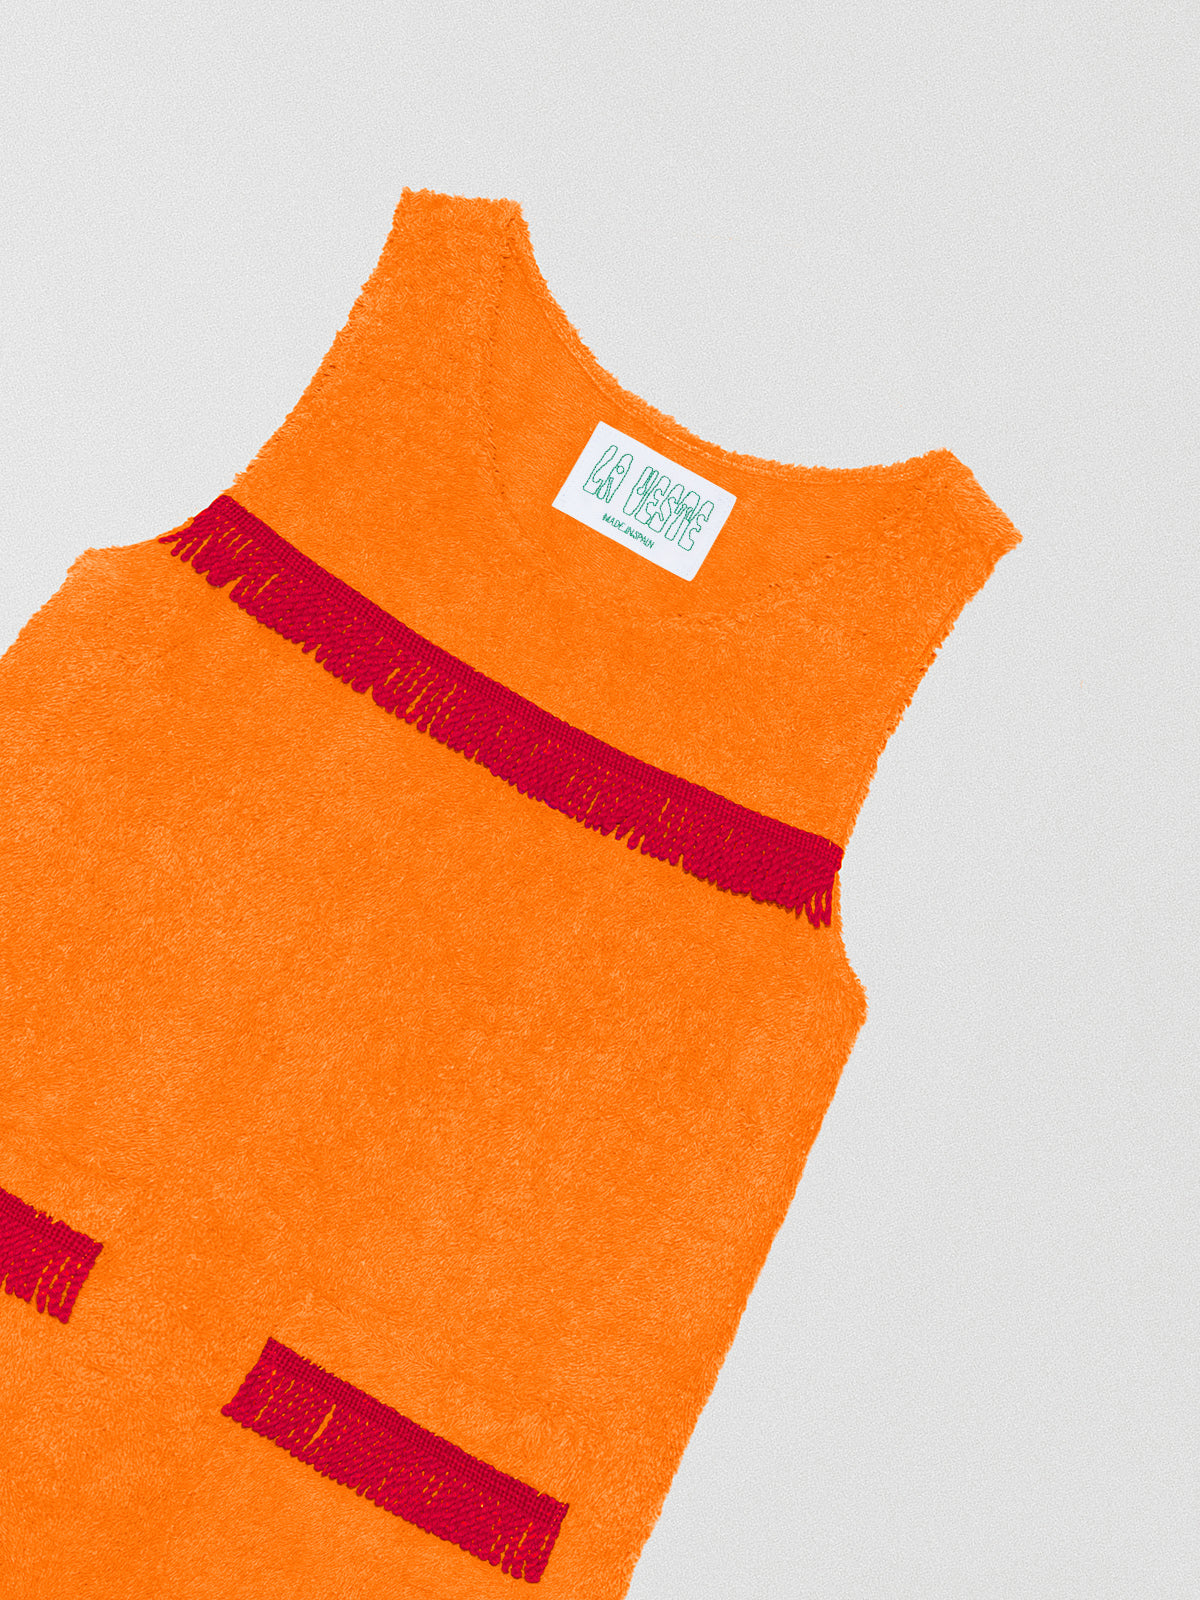 Orange towel dress with round neck and pockets with red bangs